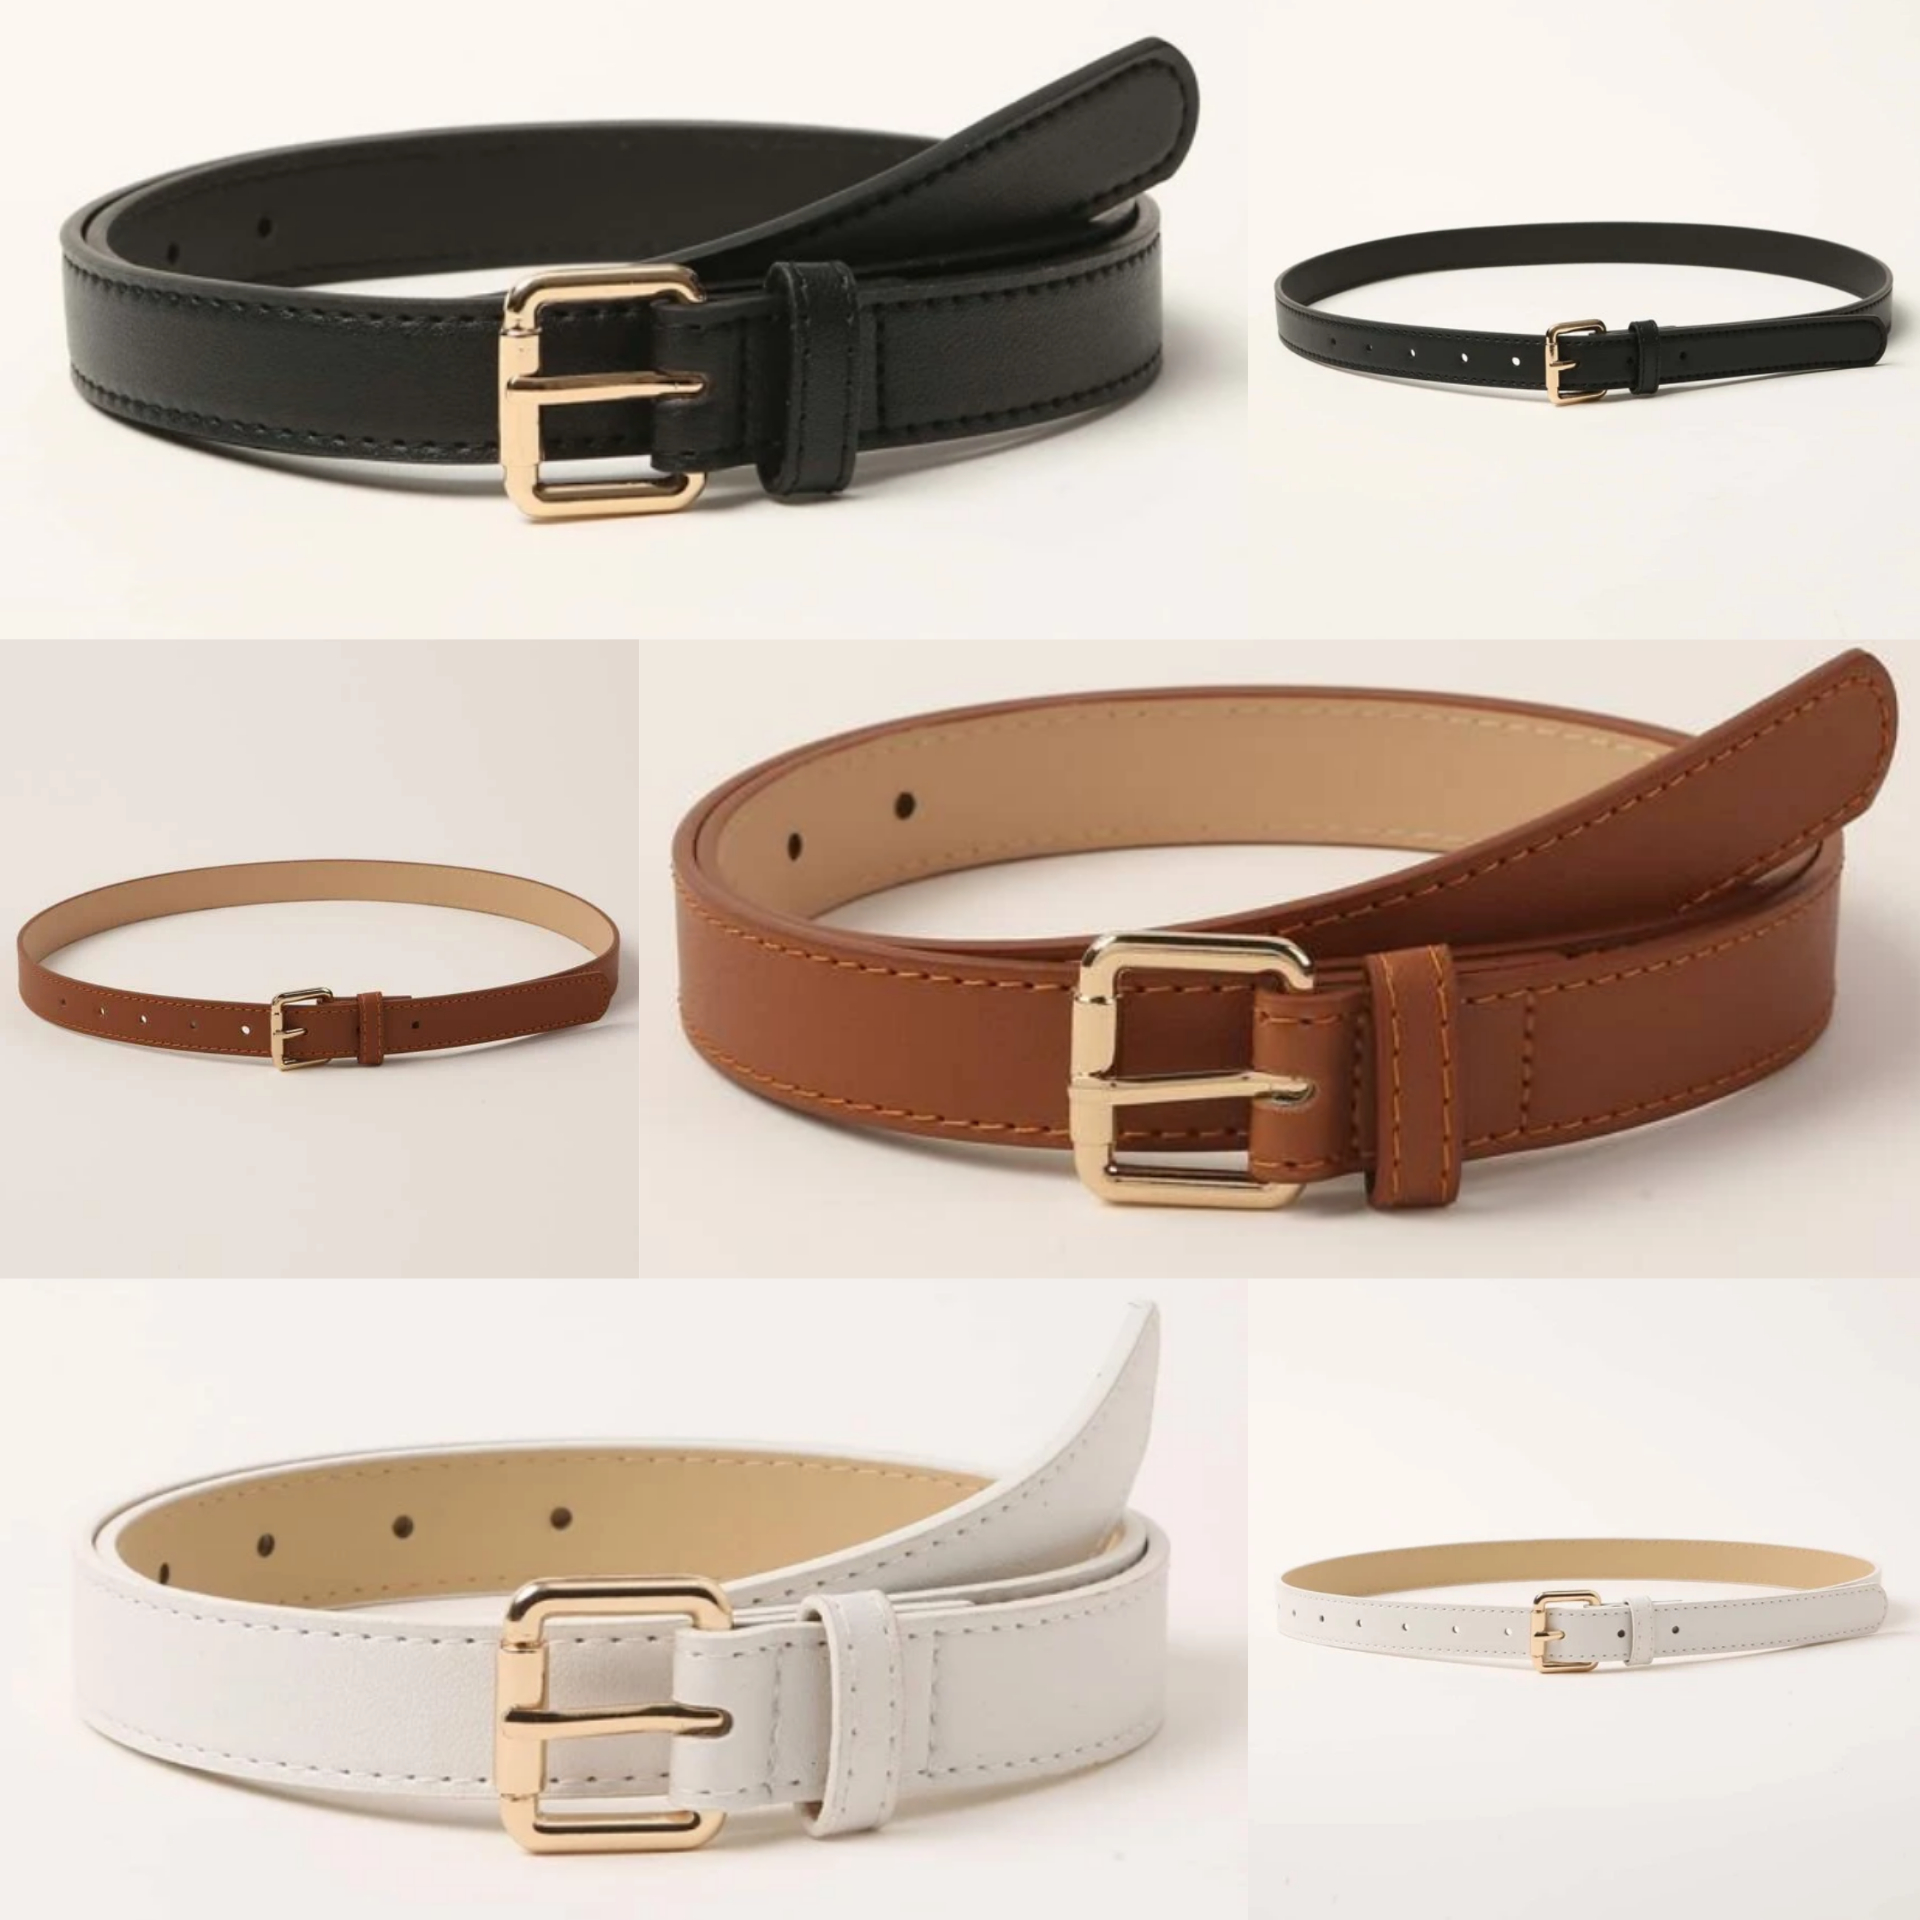 Fashion Forward: What Kind of Belts are In Style for 2023? - Fashion ...